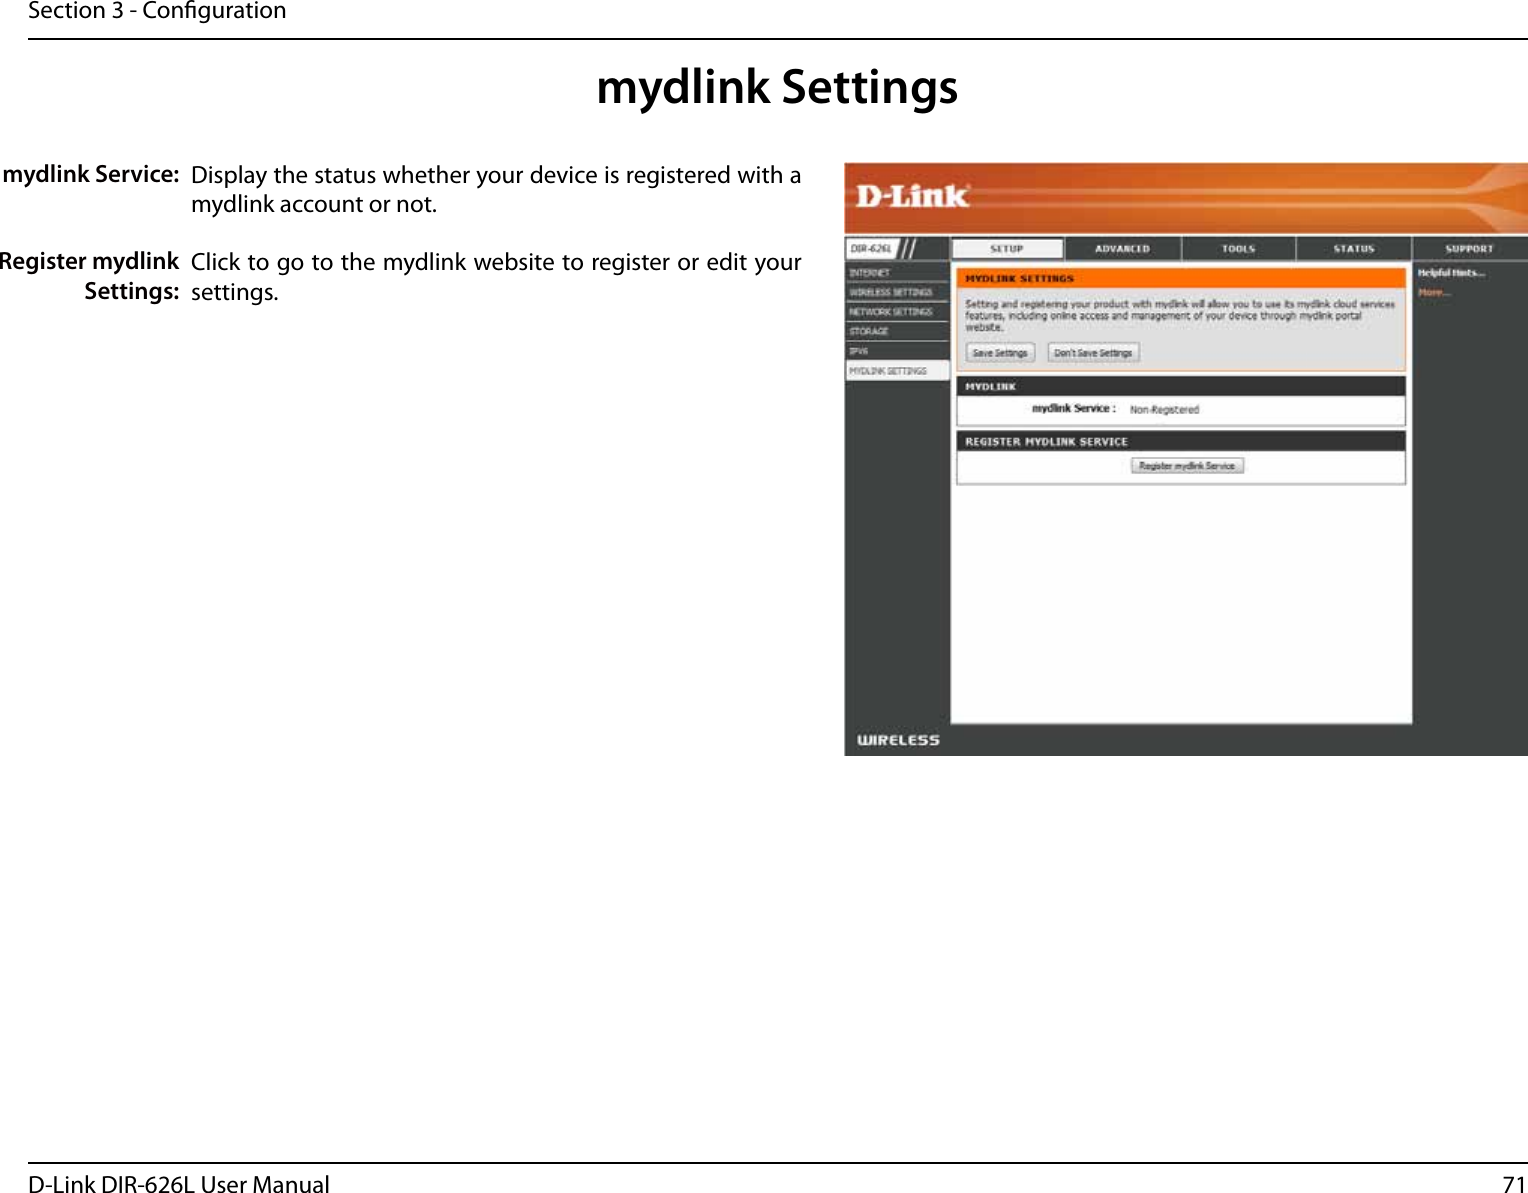 71D-Link DIR-626L User ManualSection 3 - Congurationmydlink SettingsDisplay the status whether your device is registered with a mydlink account or not.Click to go to the mydlink website to register or edit your settings.mydlink Service:Register mydlink Settings: